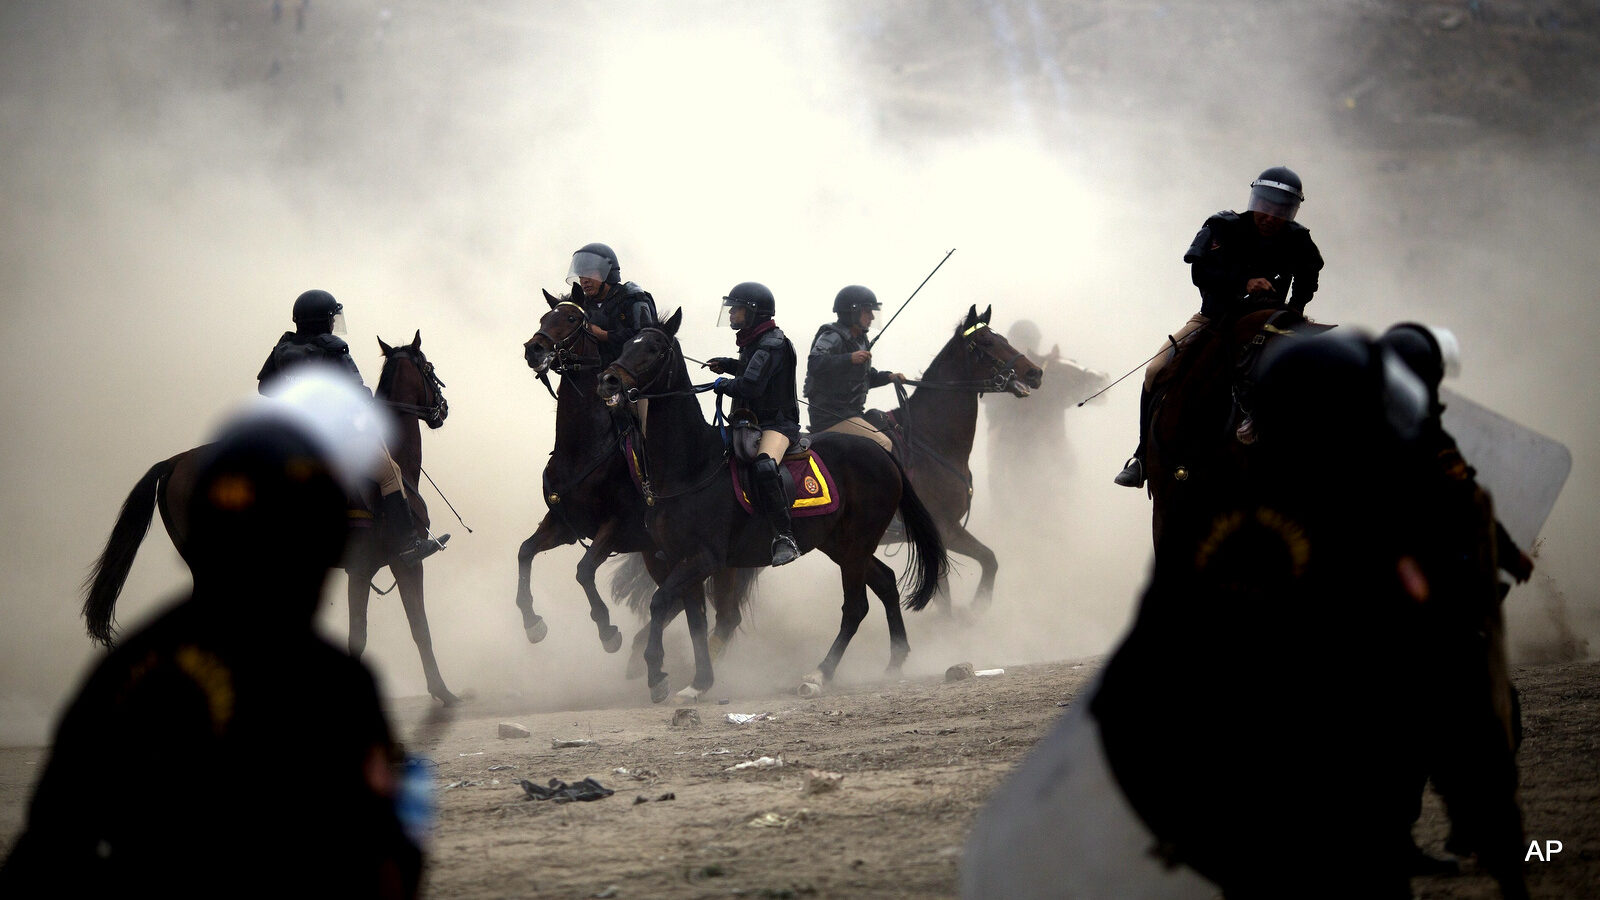 Mounted riot police clash with squatters during a land eviction in Lima Peru, Tuesday, May 19, 2015. On Monday hundreds of people squatted on land that according to the Ministry of Culture is an archaeological site.